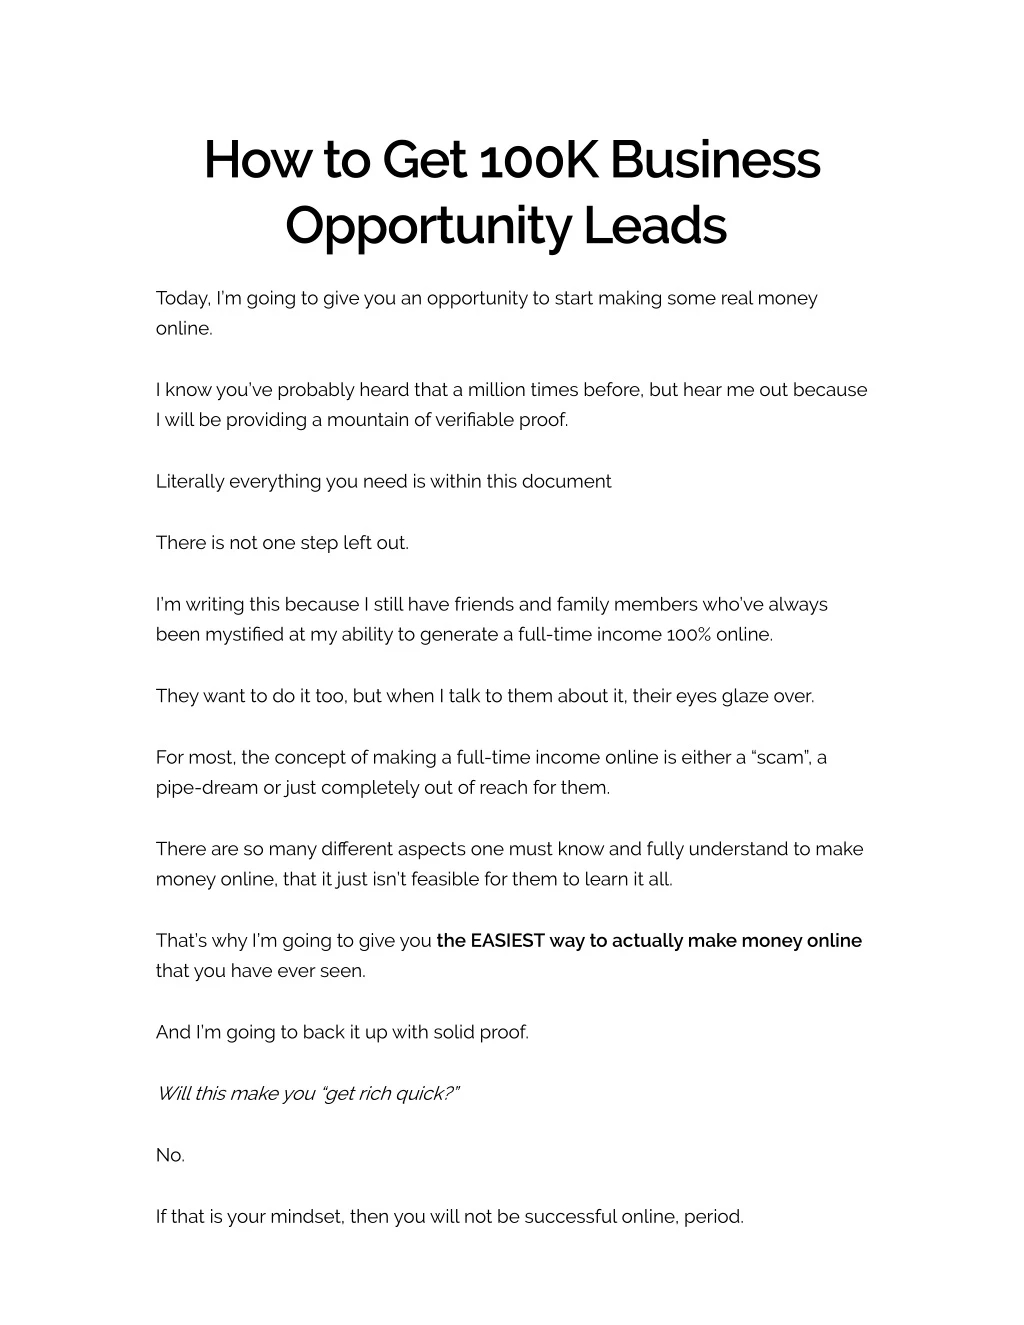 how to get 100k business opportunity leads